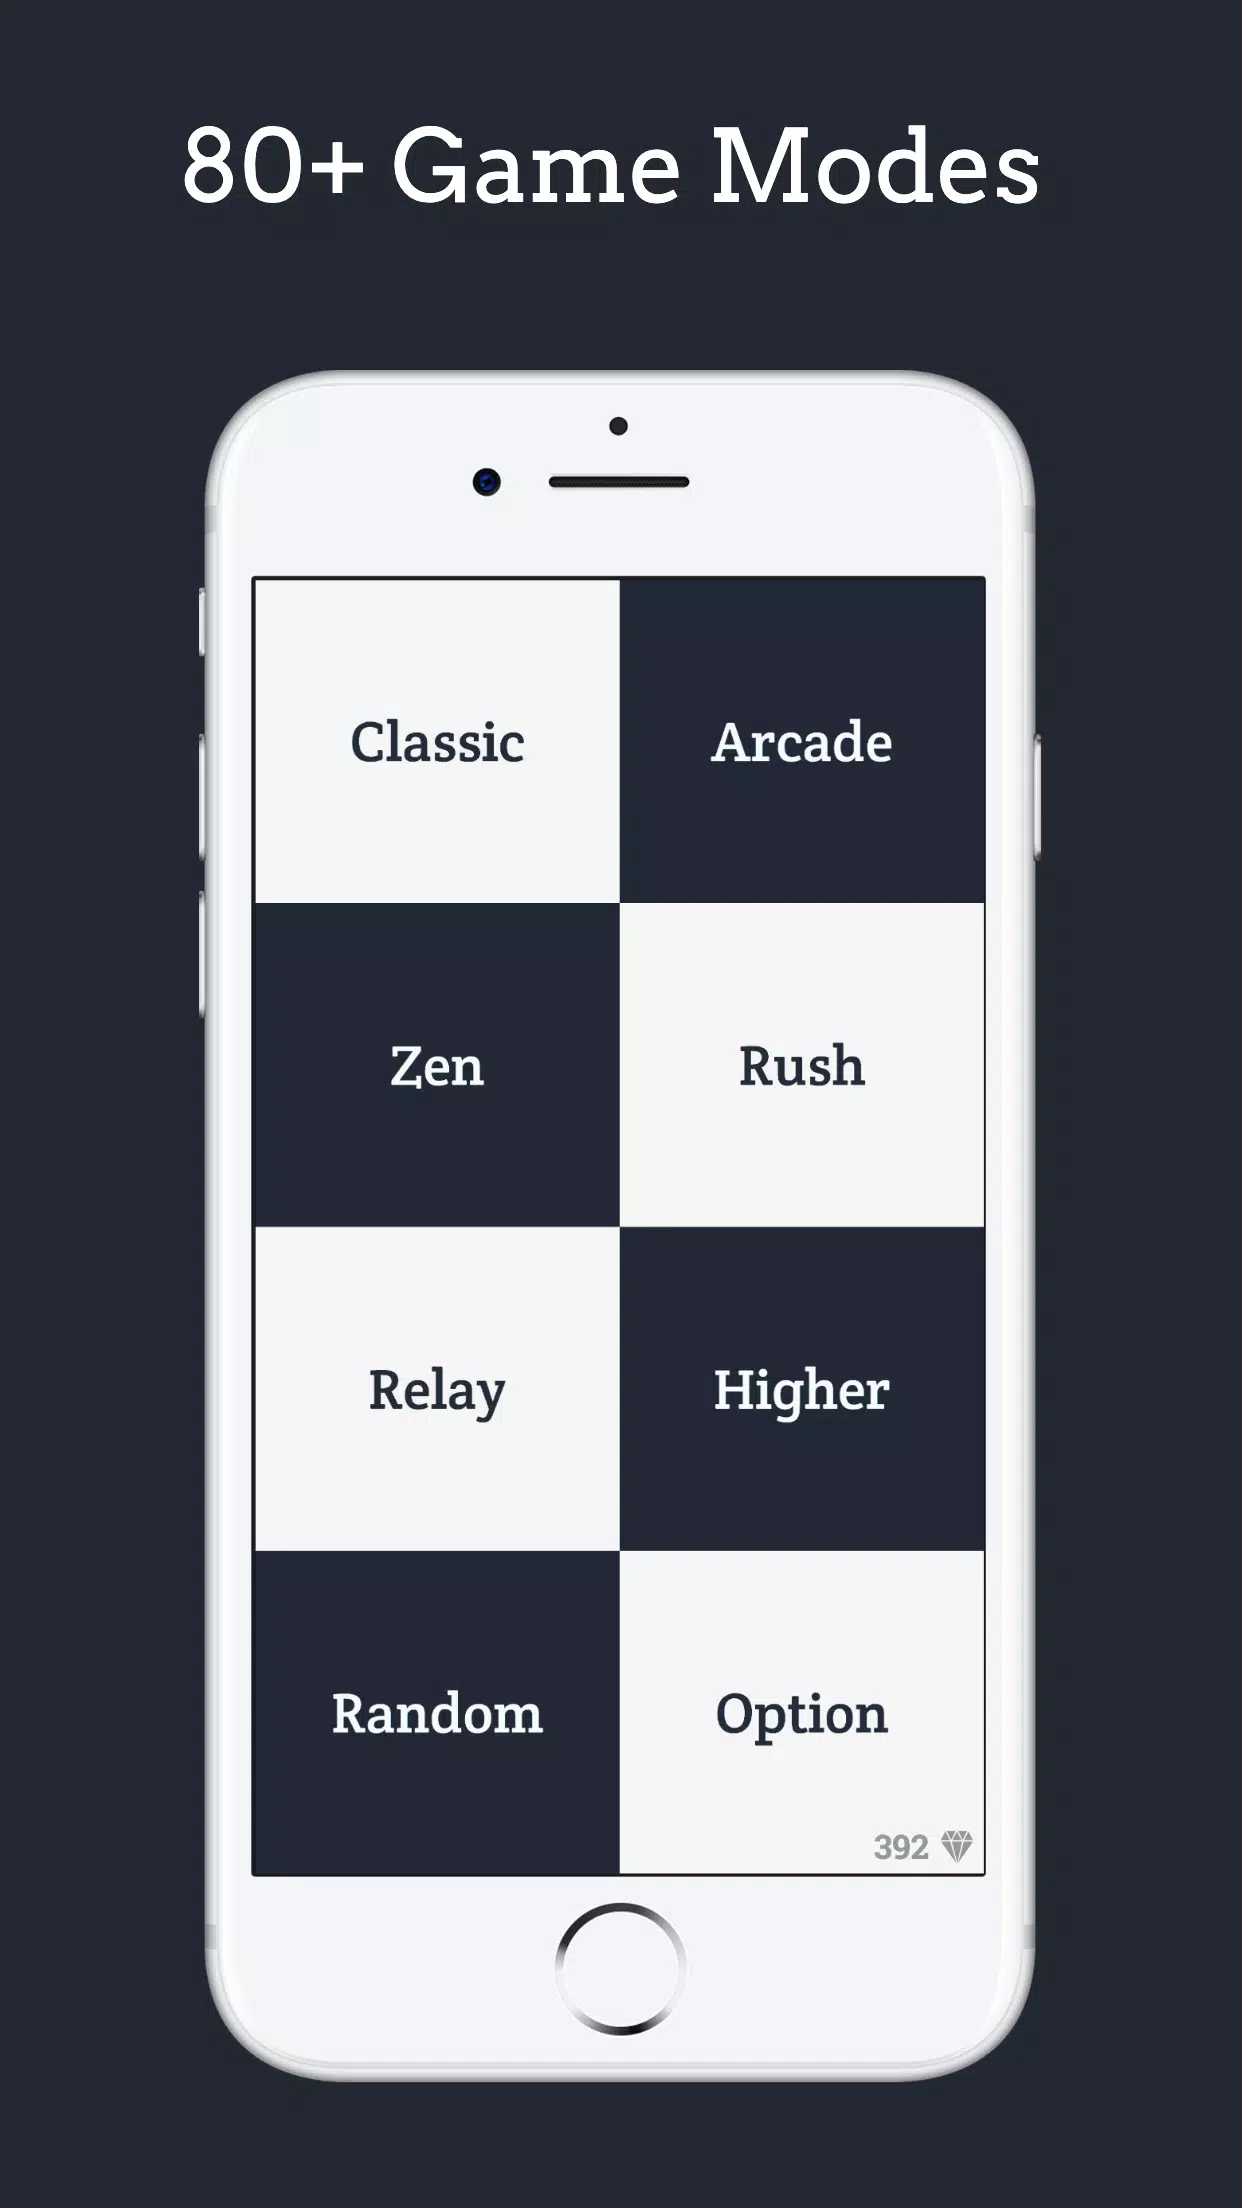 Game Piano Tiles updated their profile - Game Piano Tiles